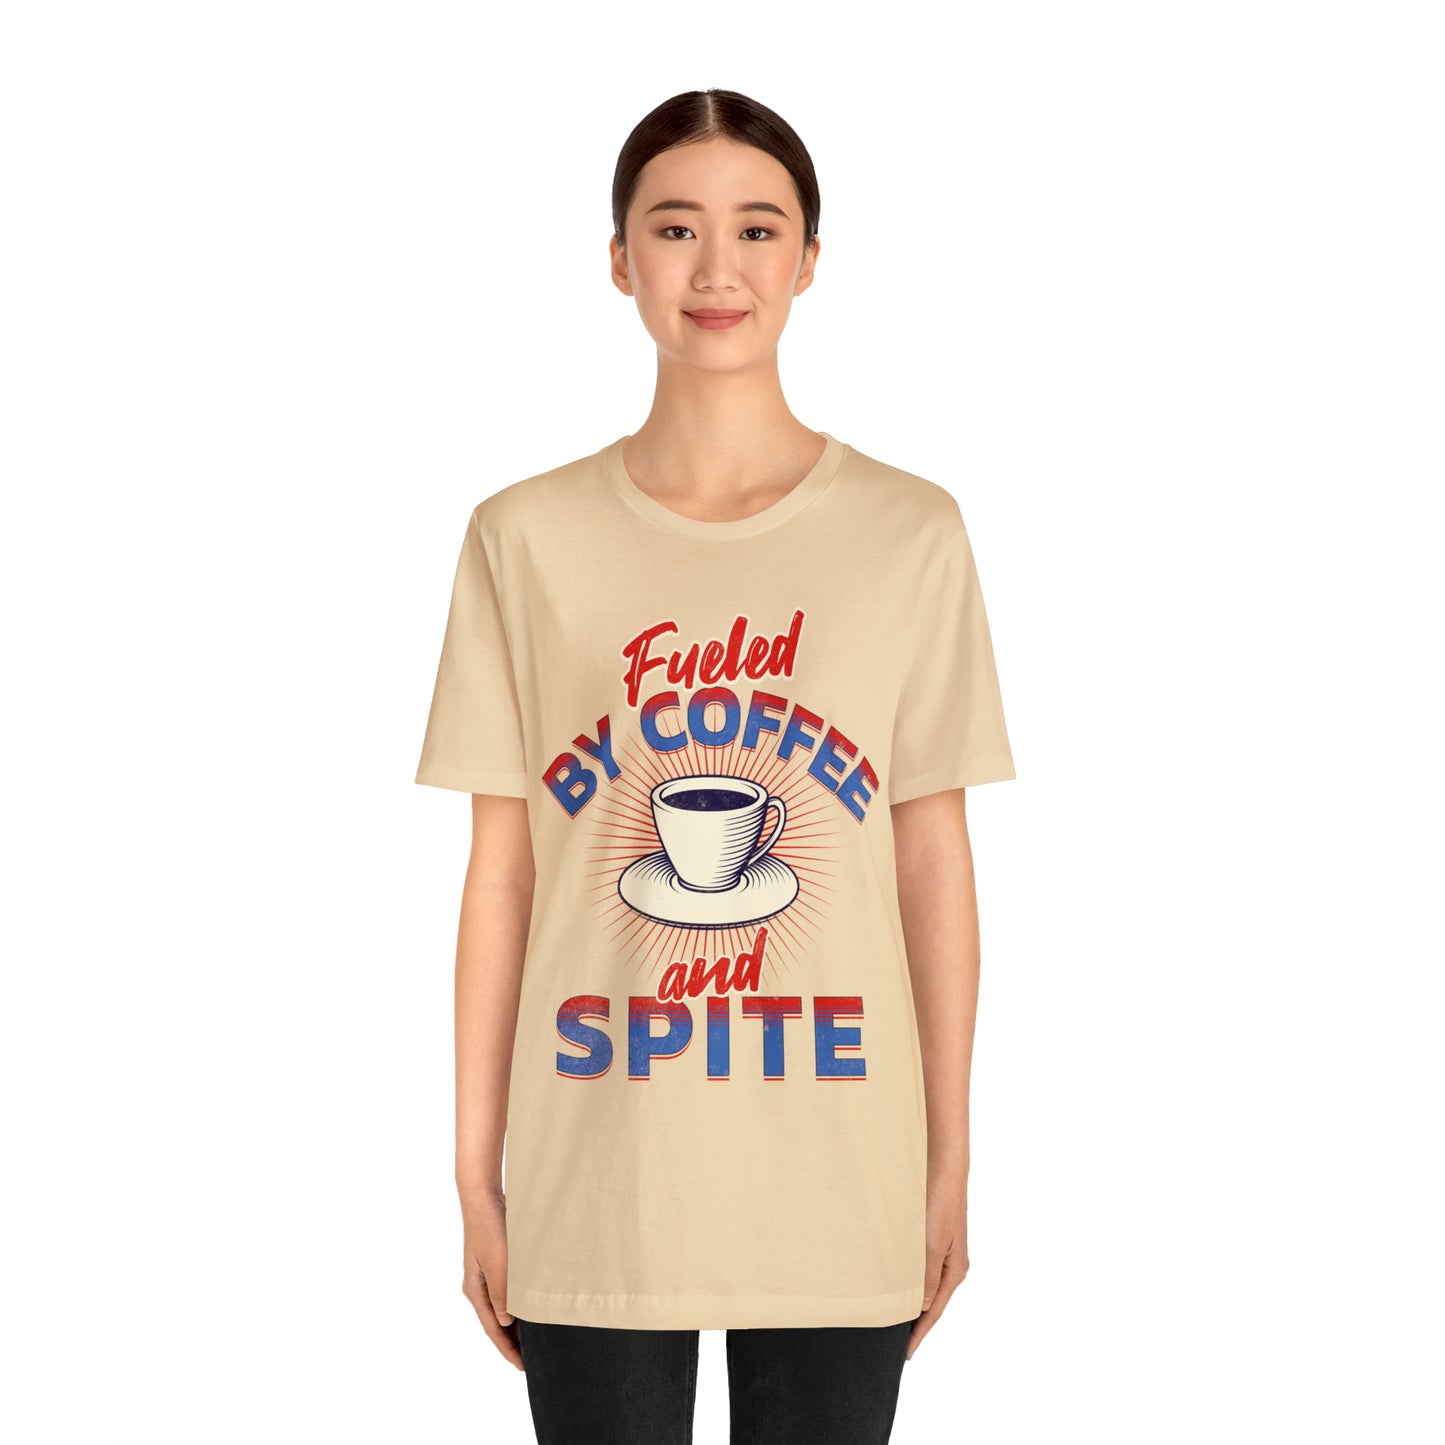 Fueled by Spite and Caffeine Shirt, Coffee, Funny T-shirt,